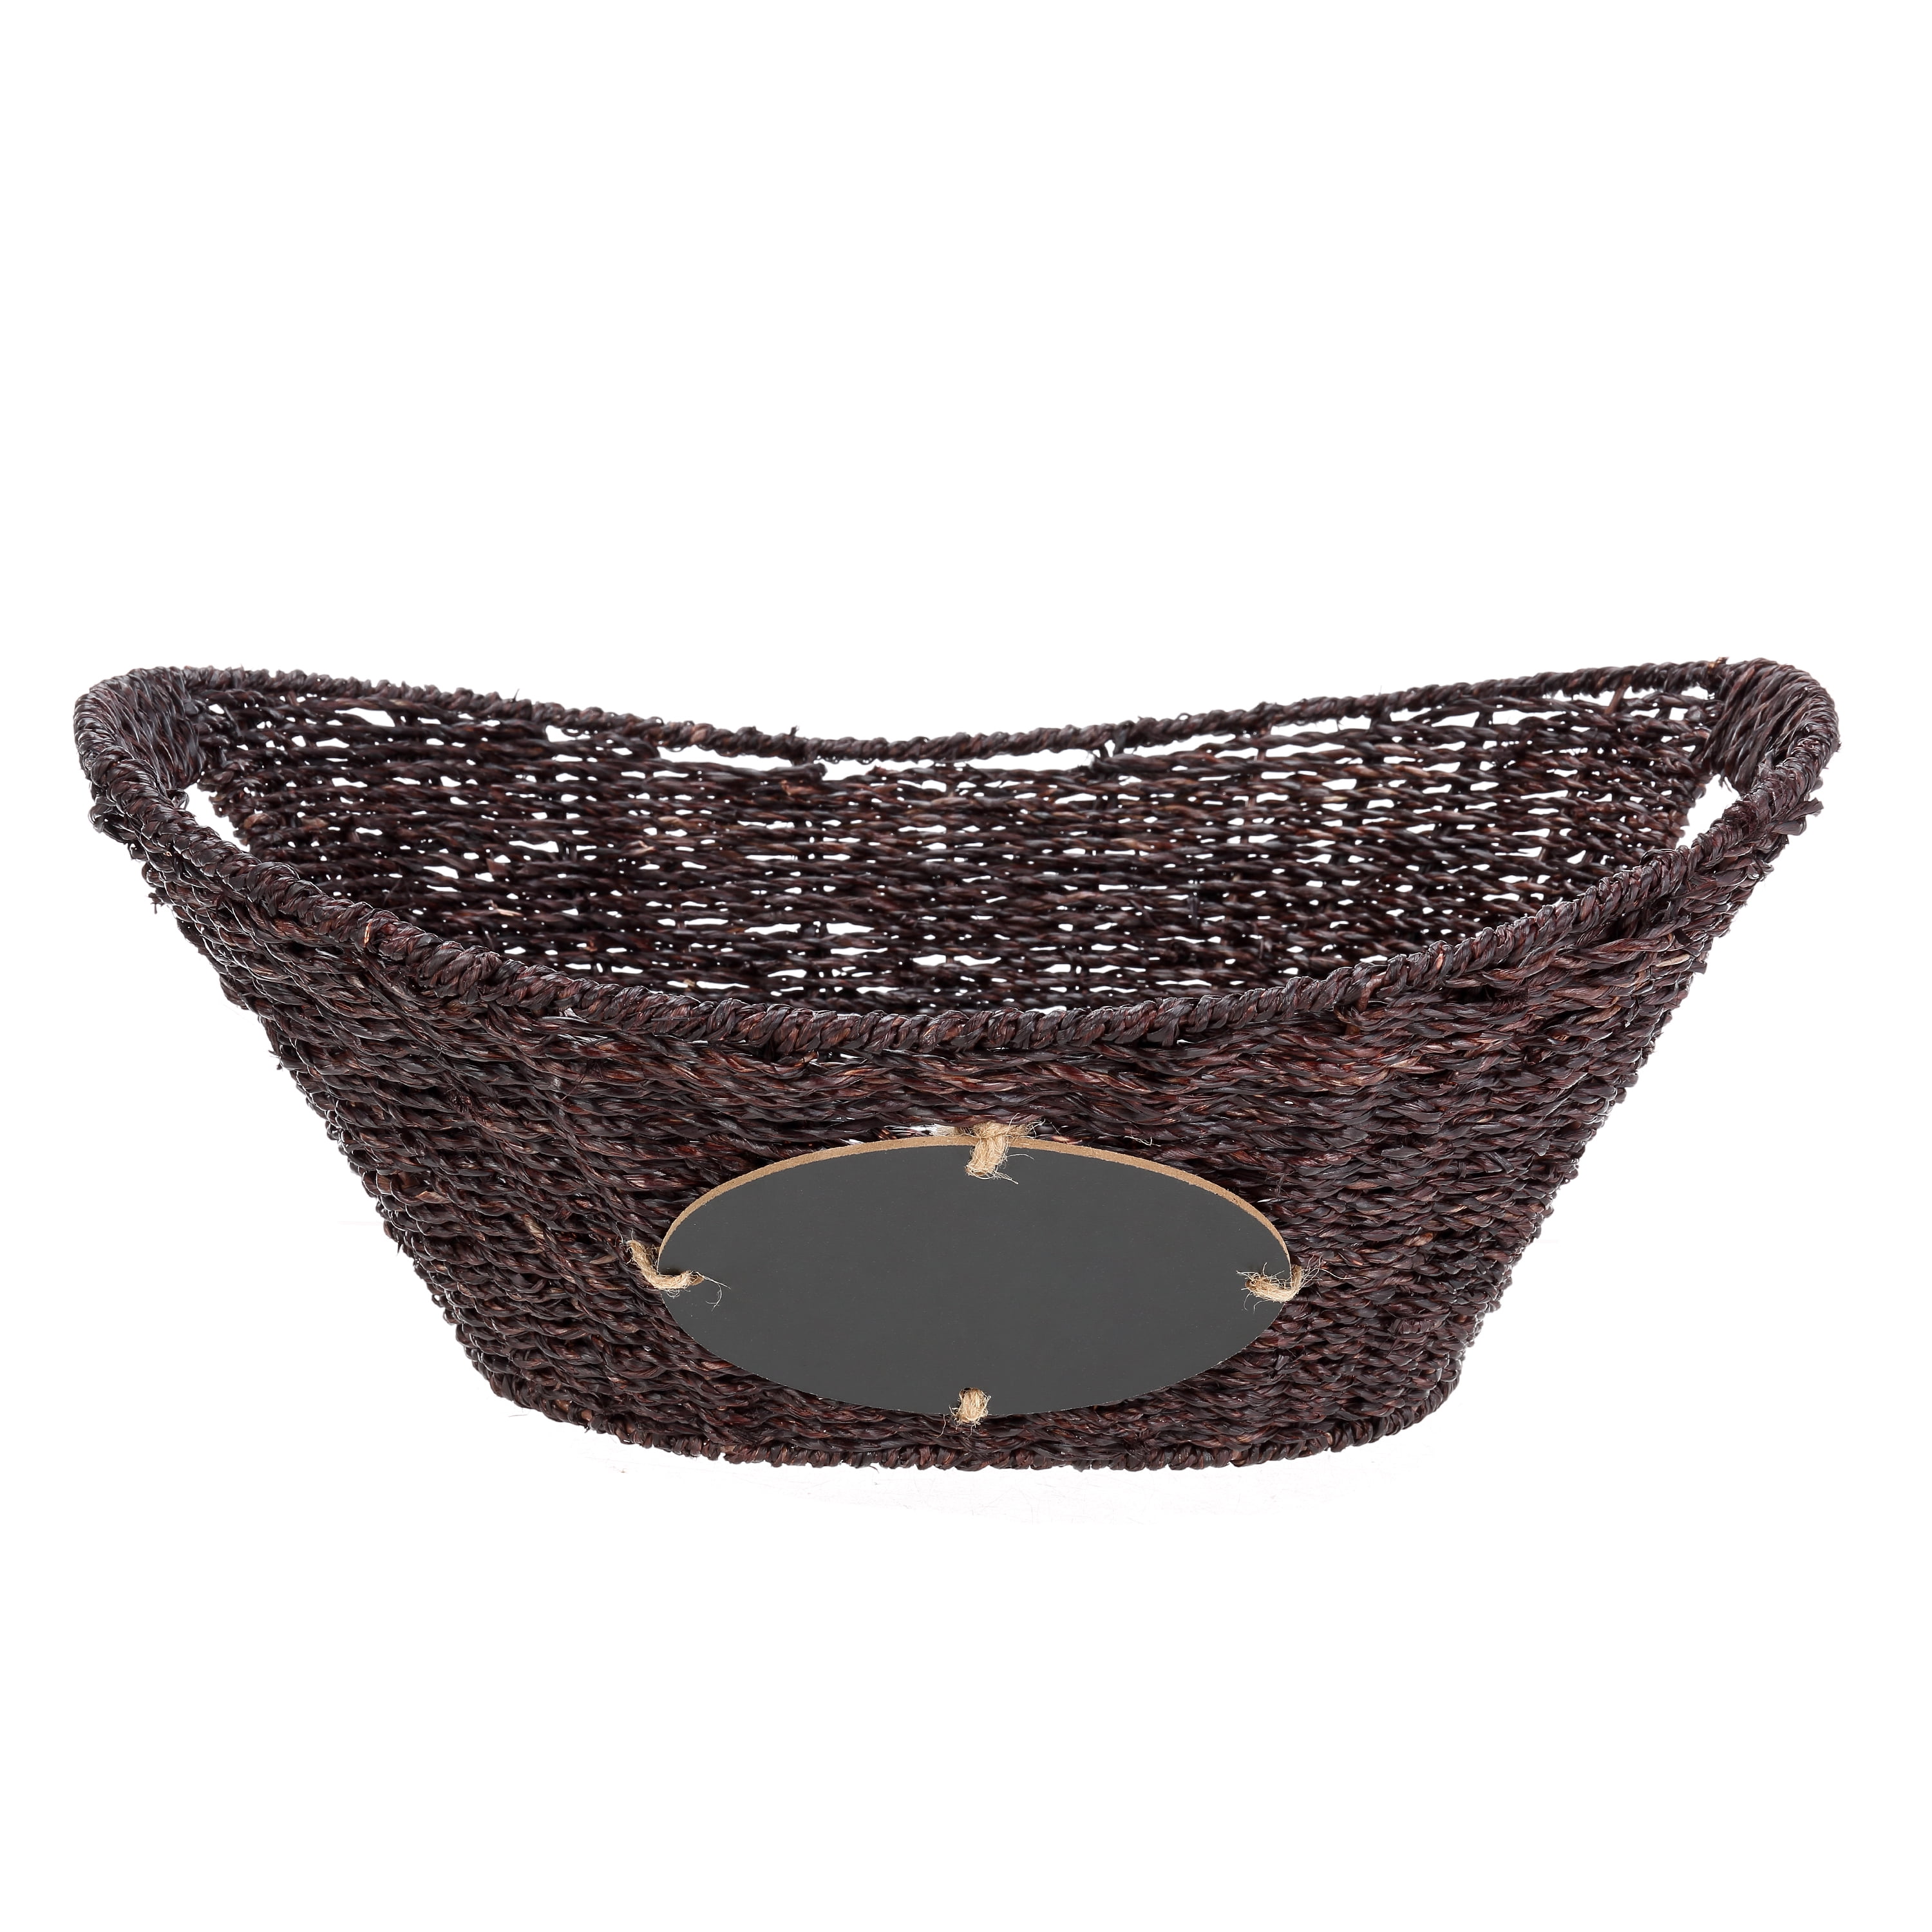 Mainstays Oval Expresso Seagrass Storage Basket, Chalkboard and Cutout Handles, 15.94L x 12.01W x 6.61H